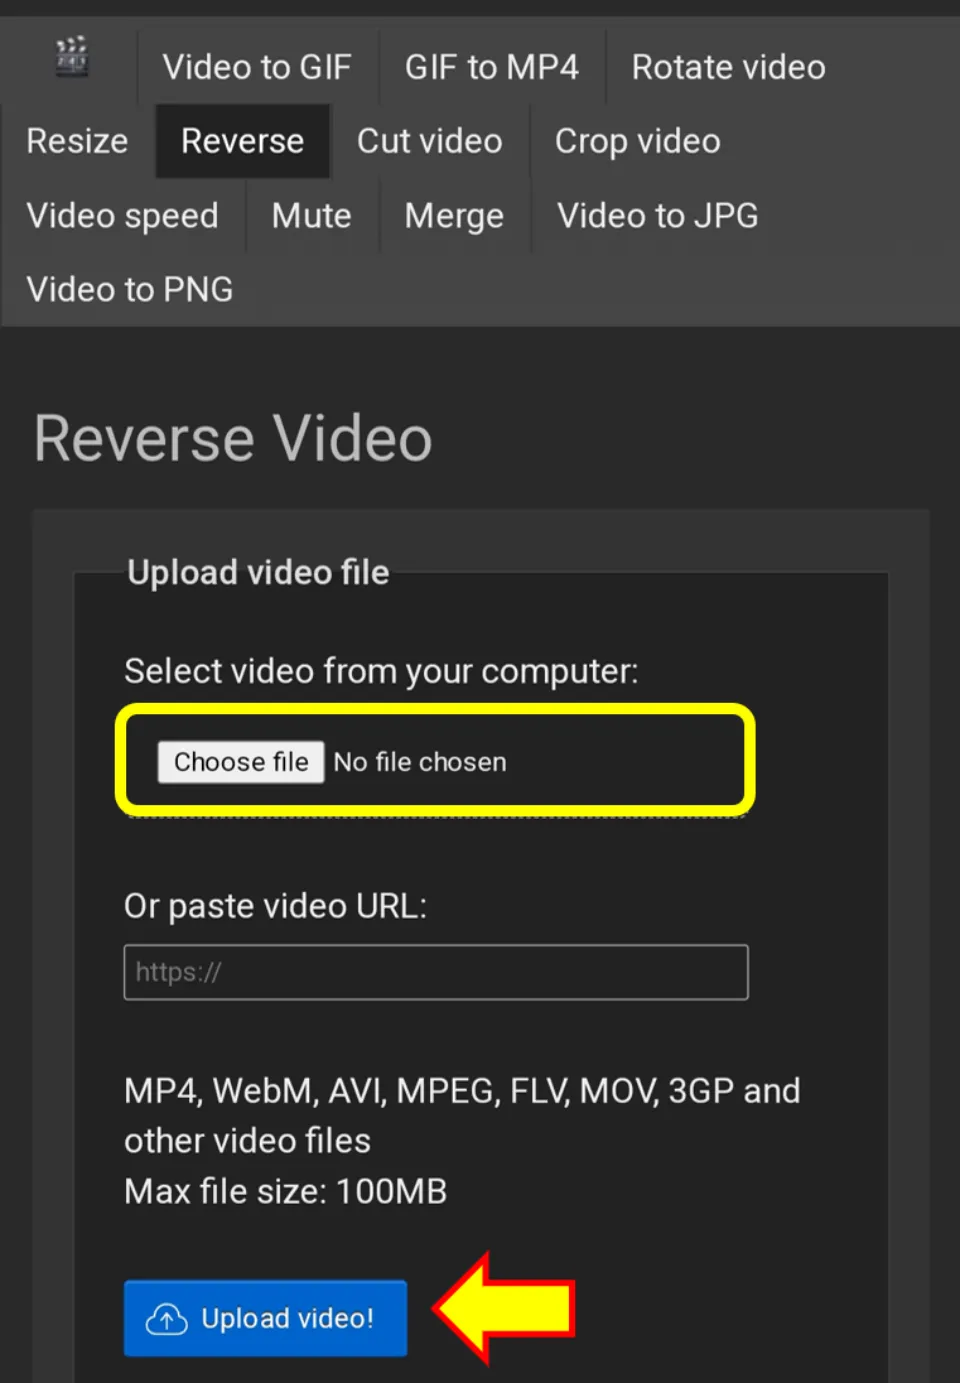 Upload the video you want to reverse